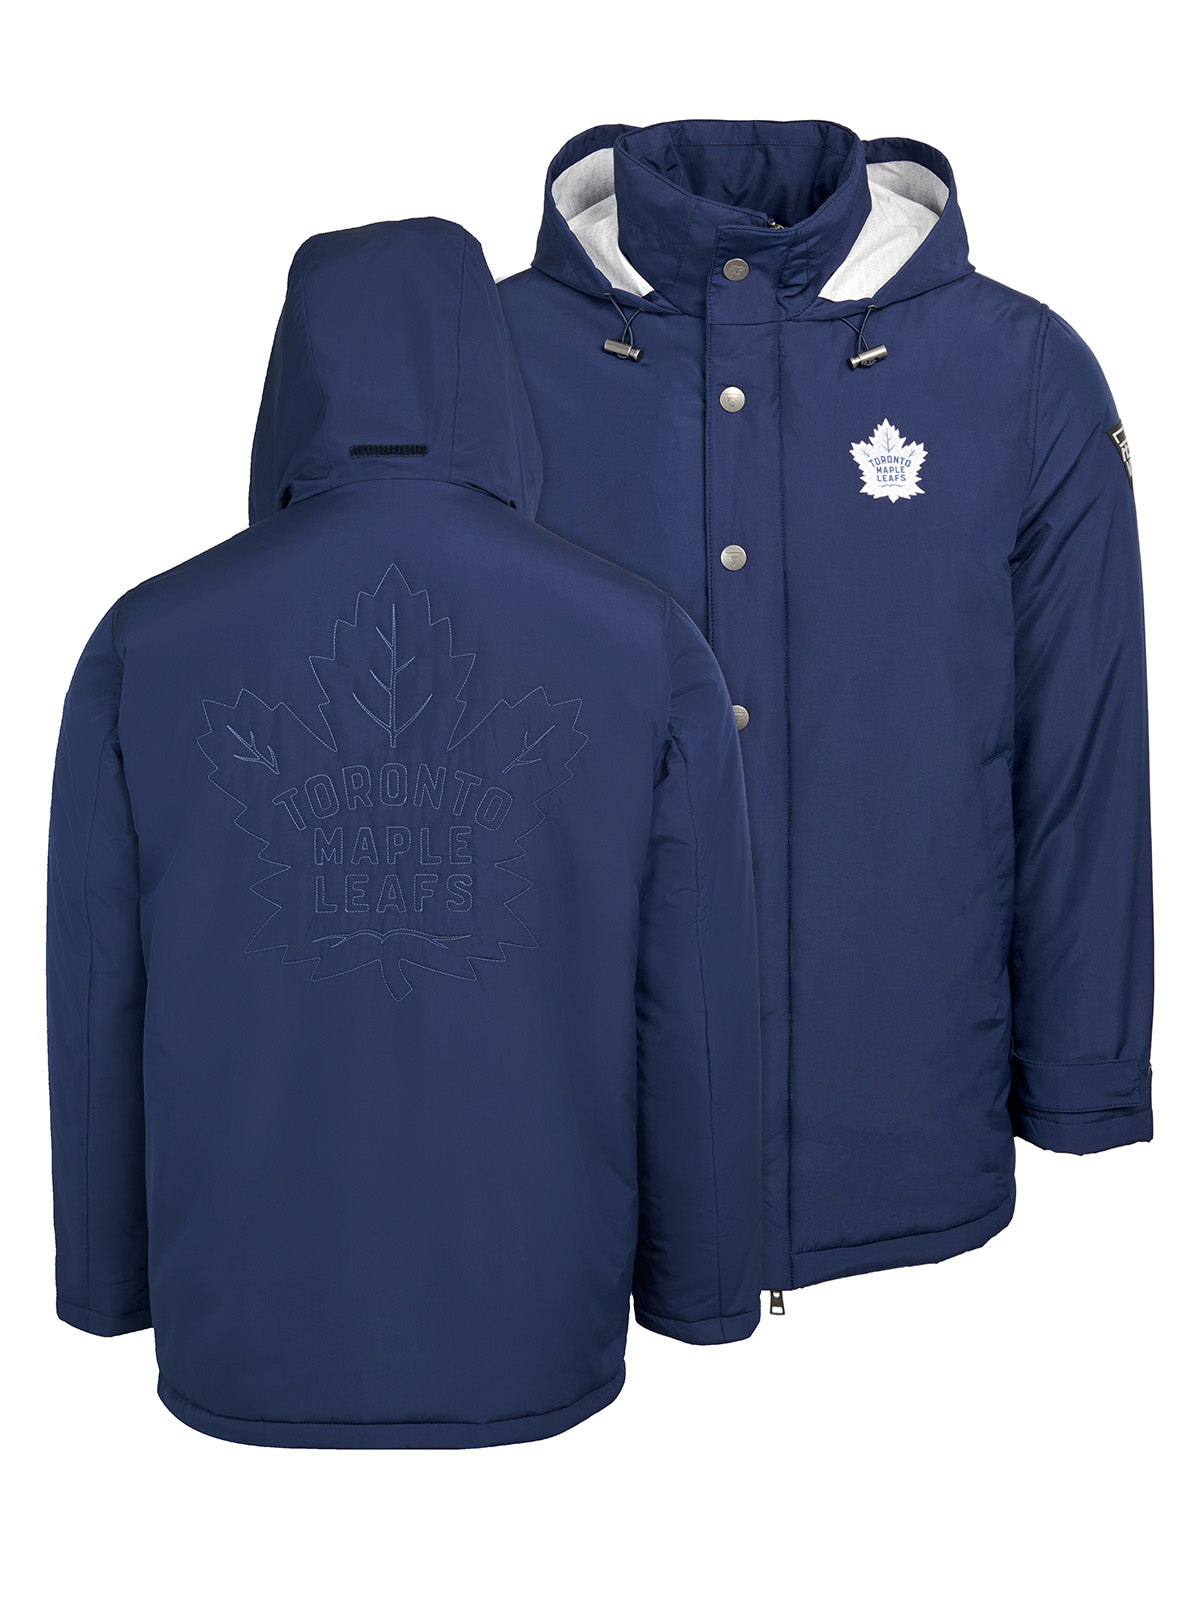 Toronto Maple Leafs Coach's Jacket - The jacket features a quilted stitch of the Toronto Maple Leafs logo centered on the back and has a removal hood in the team colors, elevating this NHL hockey clothing collection